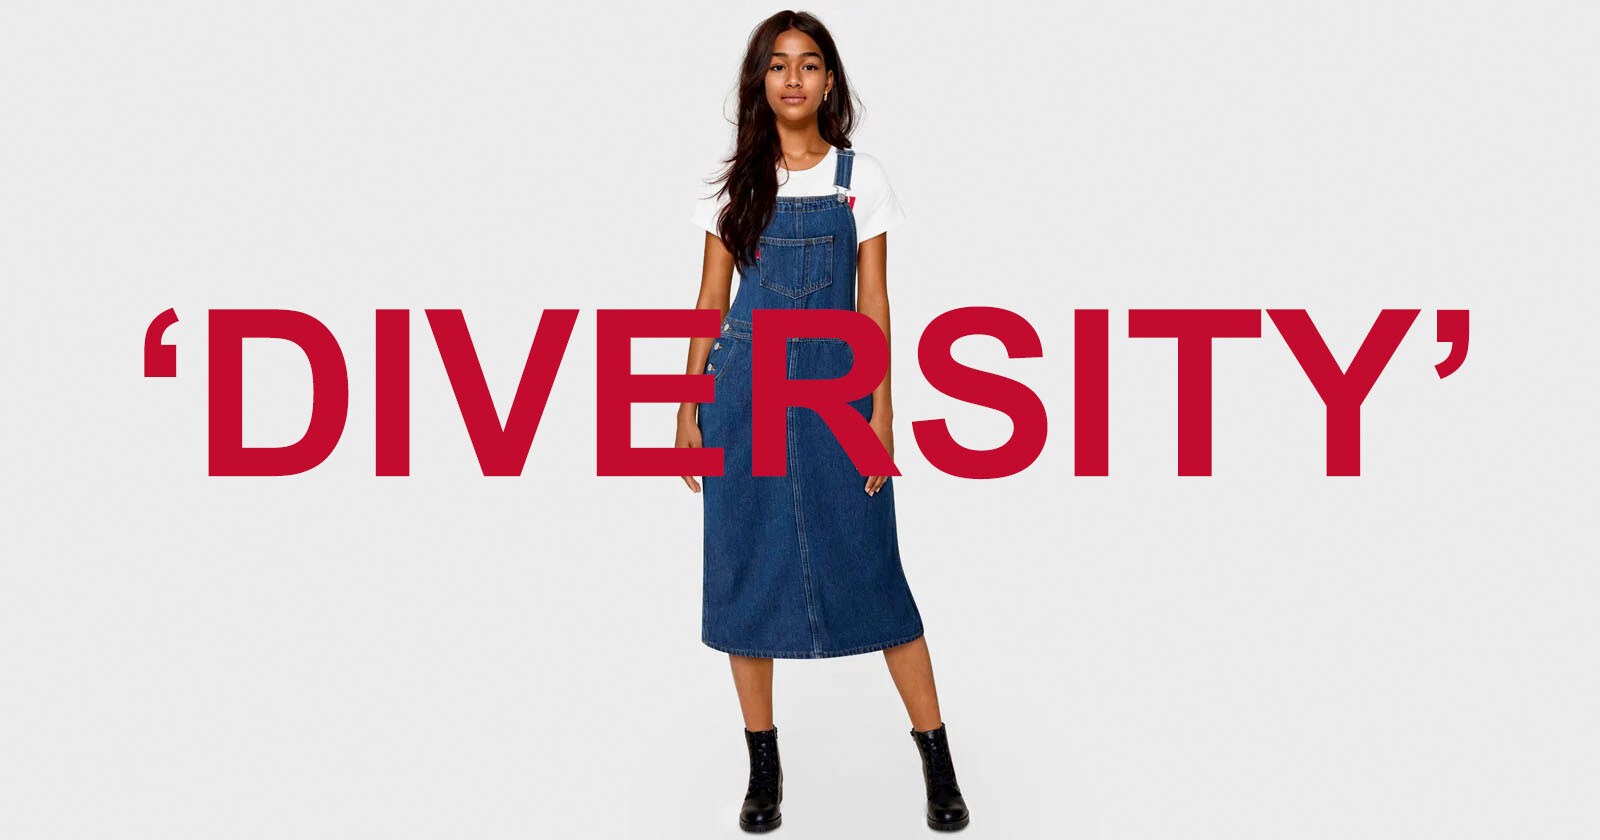 Levis Use of AI to Increase Diversity is Wildly Tone-Deaf